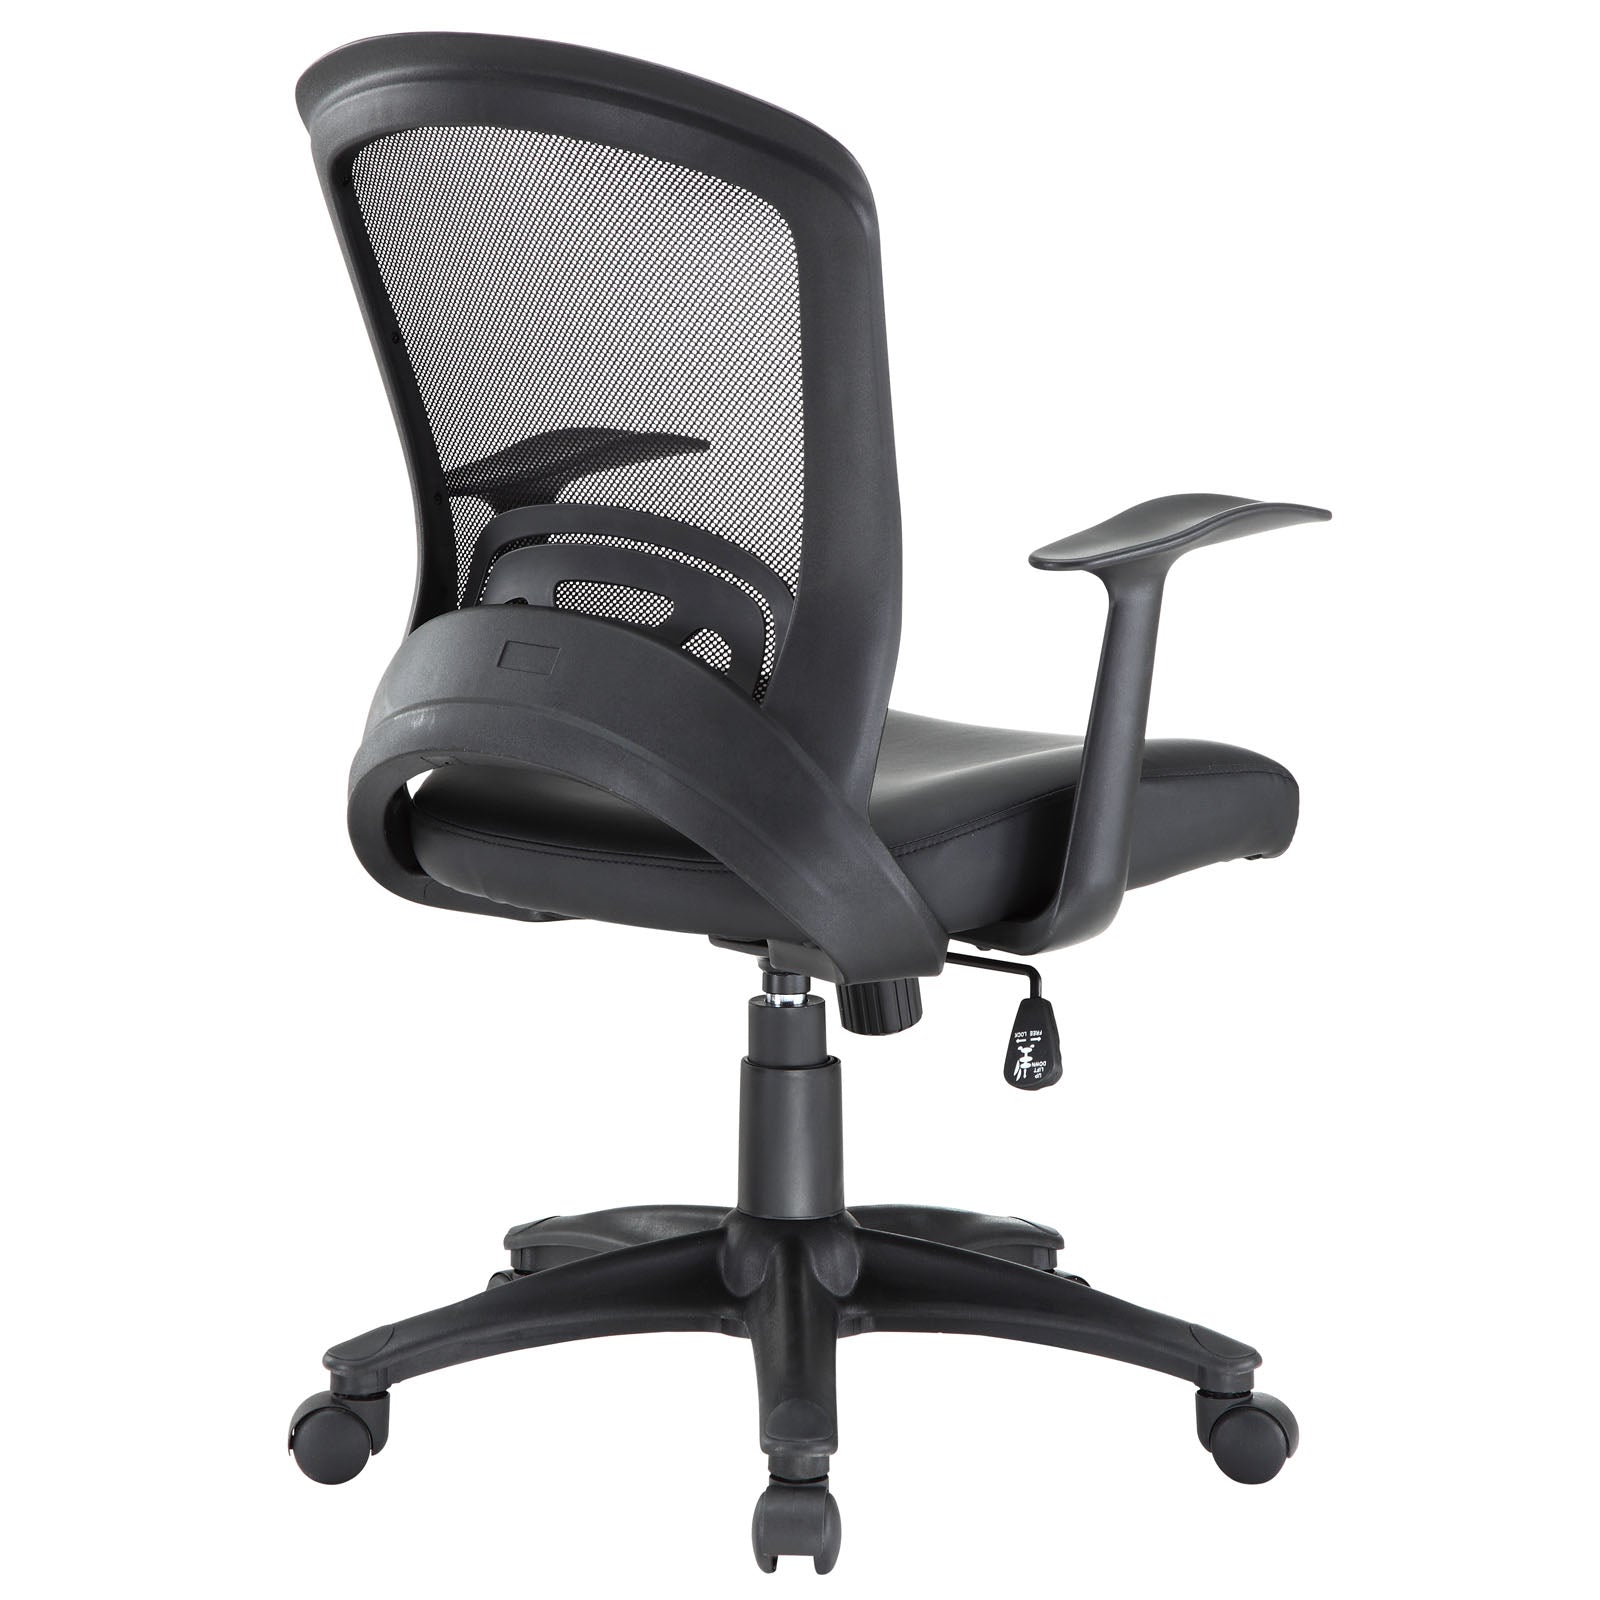 Make Your Work space comfortable with Pulse Vinyl Office Chair